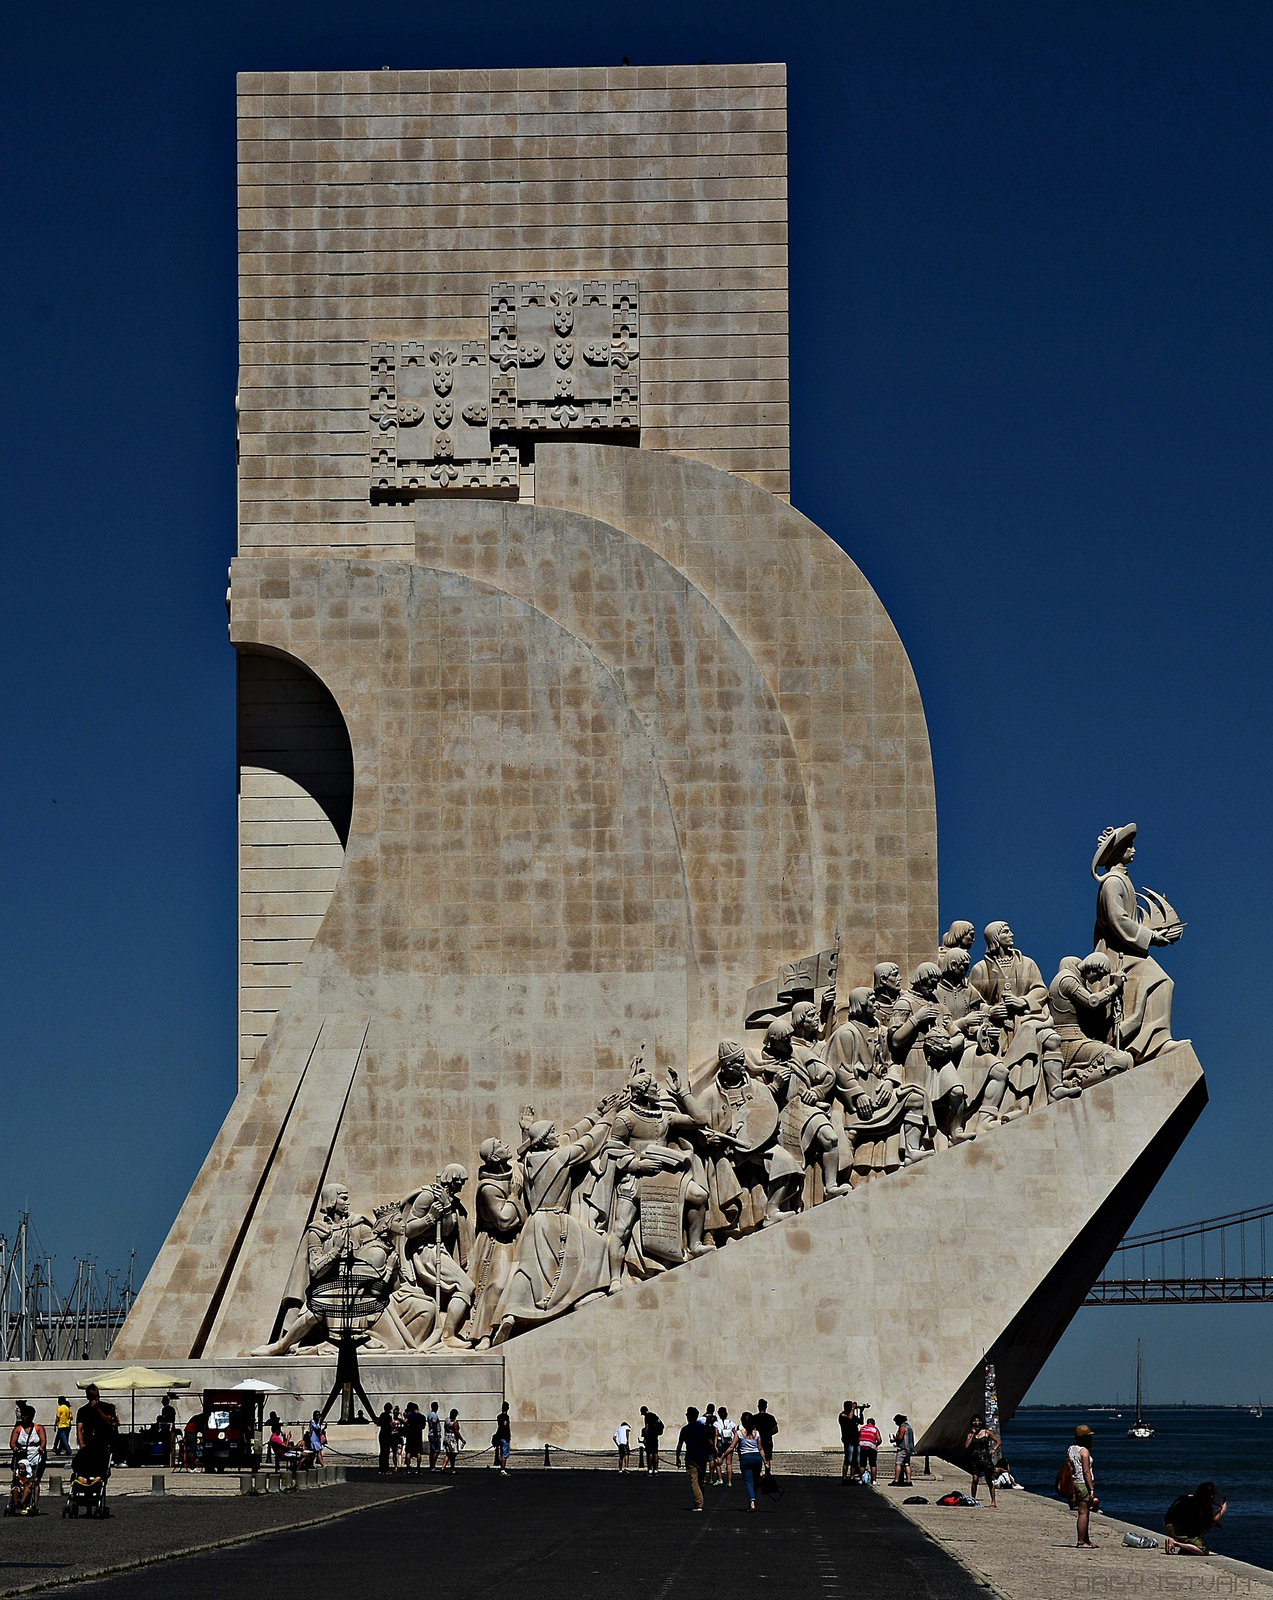 Lisbon - Monument of the Discoveries 3627